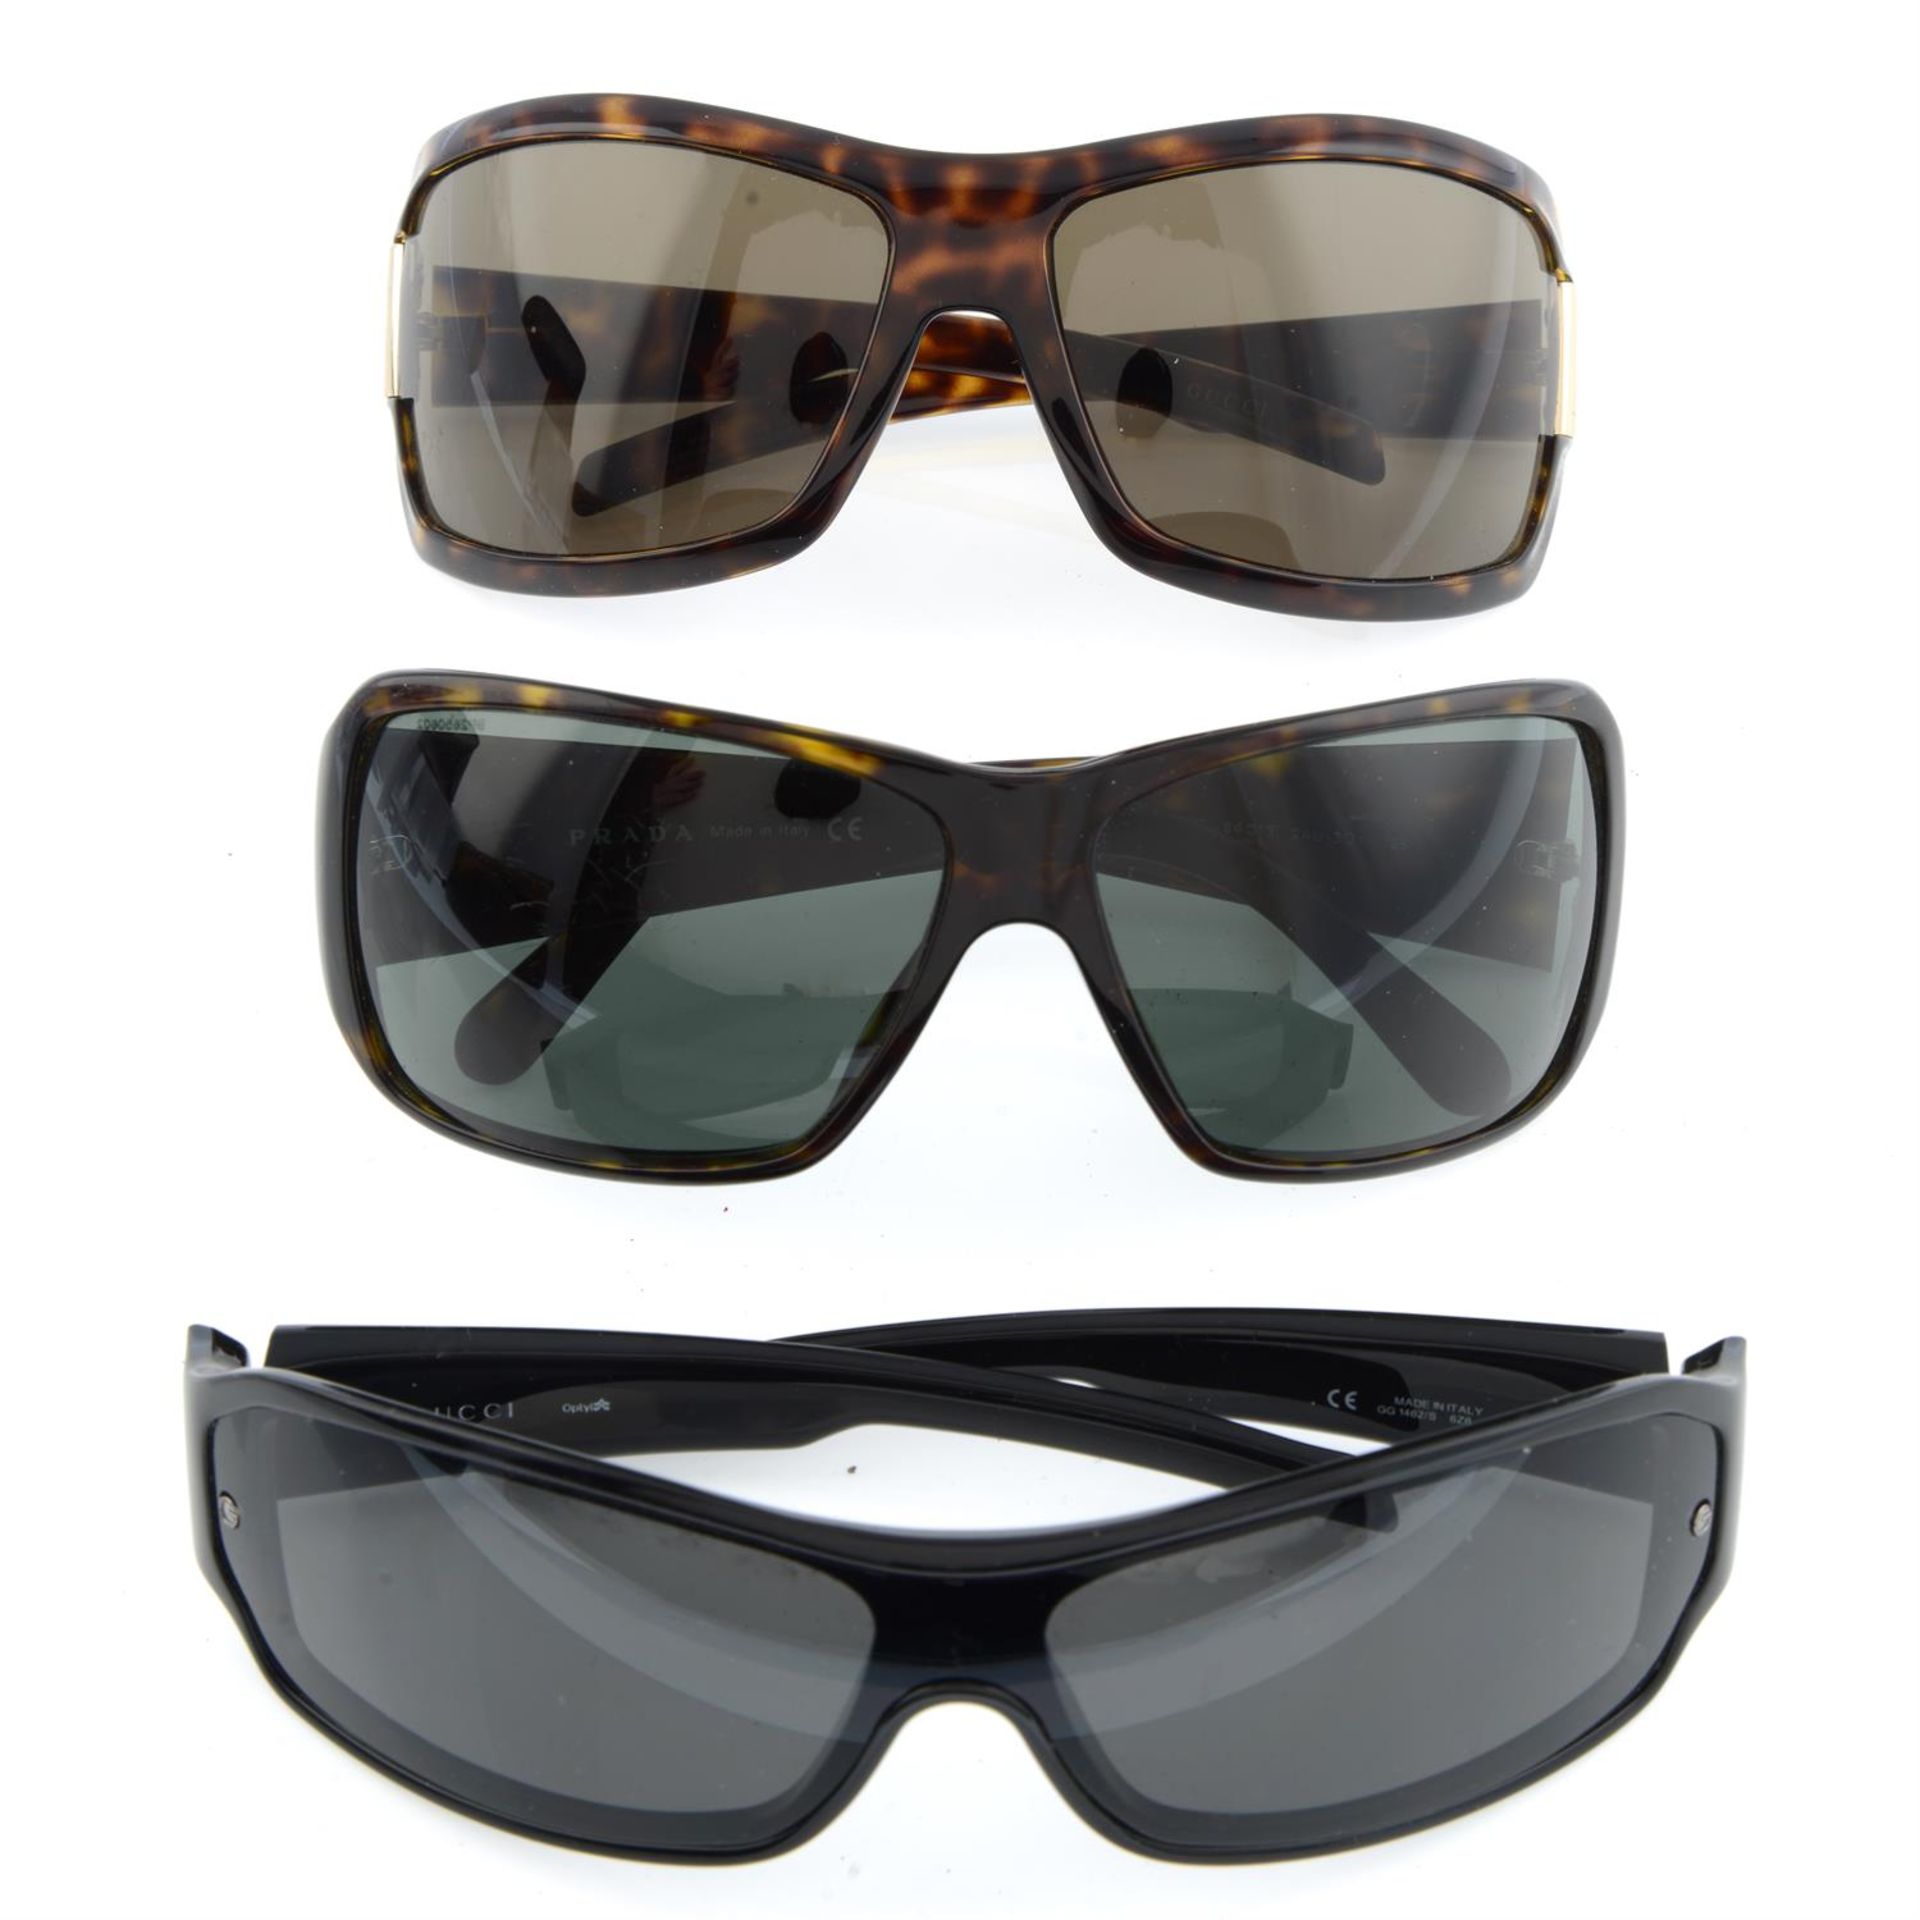 Collection of designers - three pairs of sunglasses.